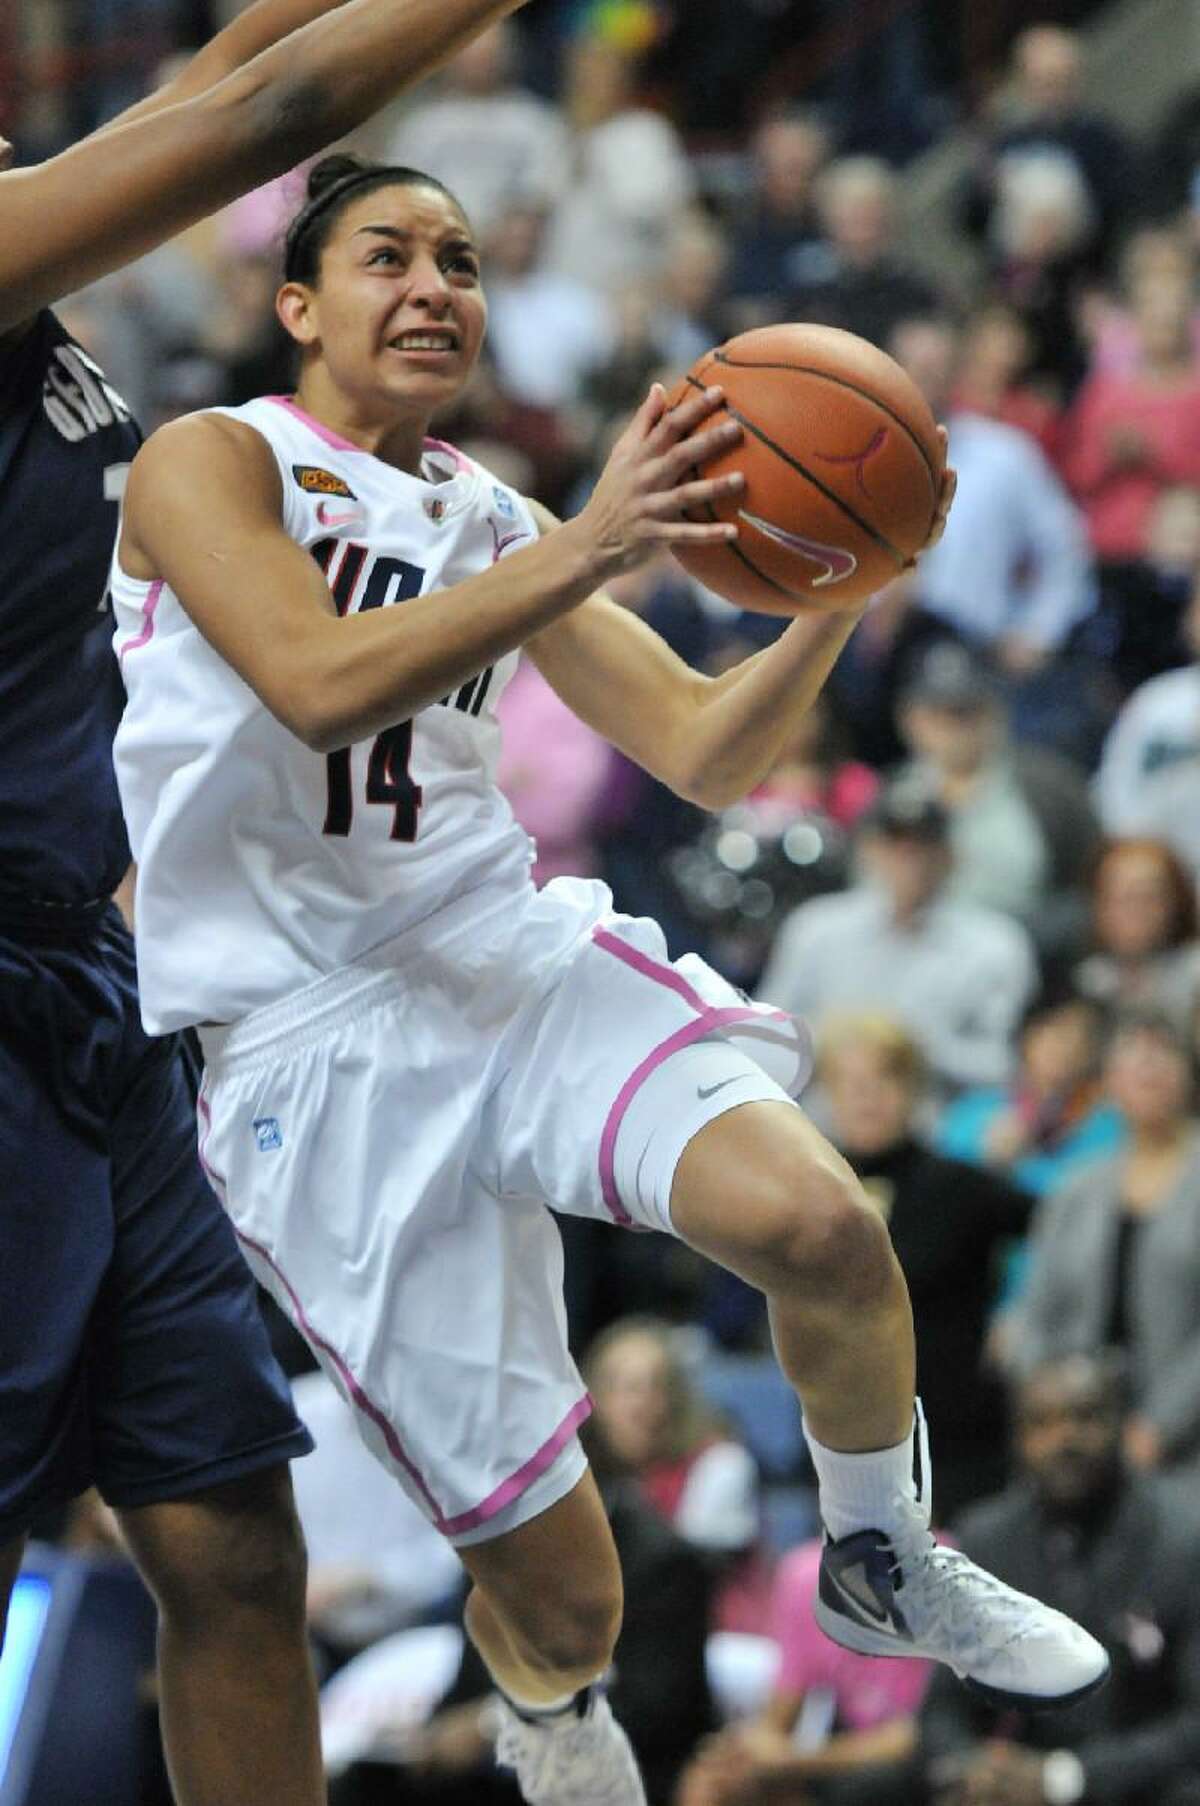 ASSOCIATED PRESS Connecticut's Bria Hartley makes her move to the basket during Saturday's game against Georgetown at Gampel Pavilion in Storrs. The Huskies won 80-38 to extend their home winning streak to 99 straight homes.